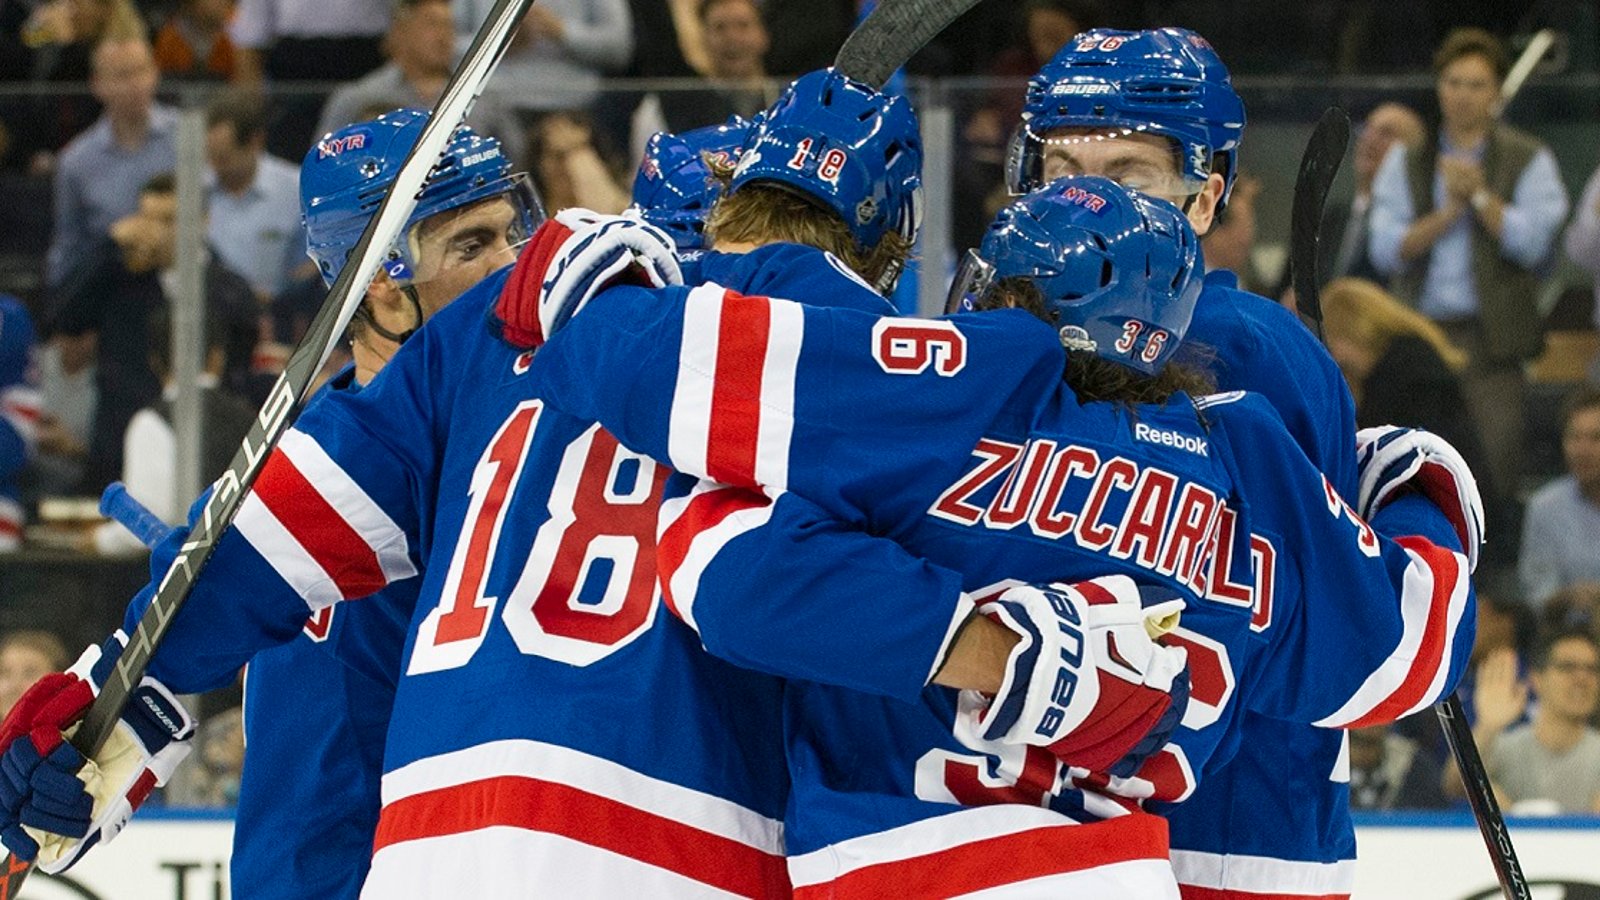 Report: Rangers lose one of their core players for at least the next two games.